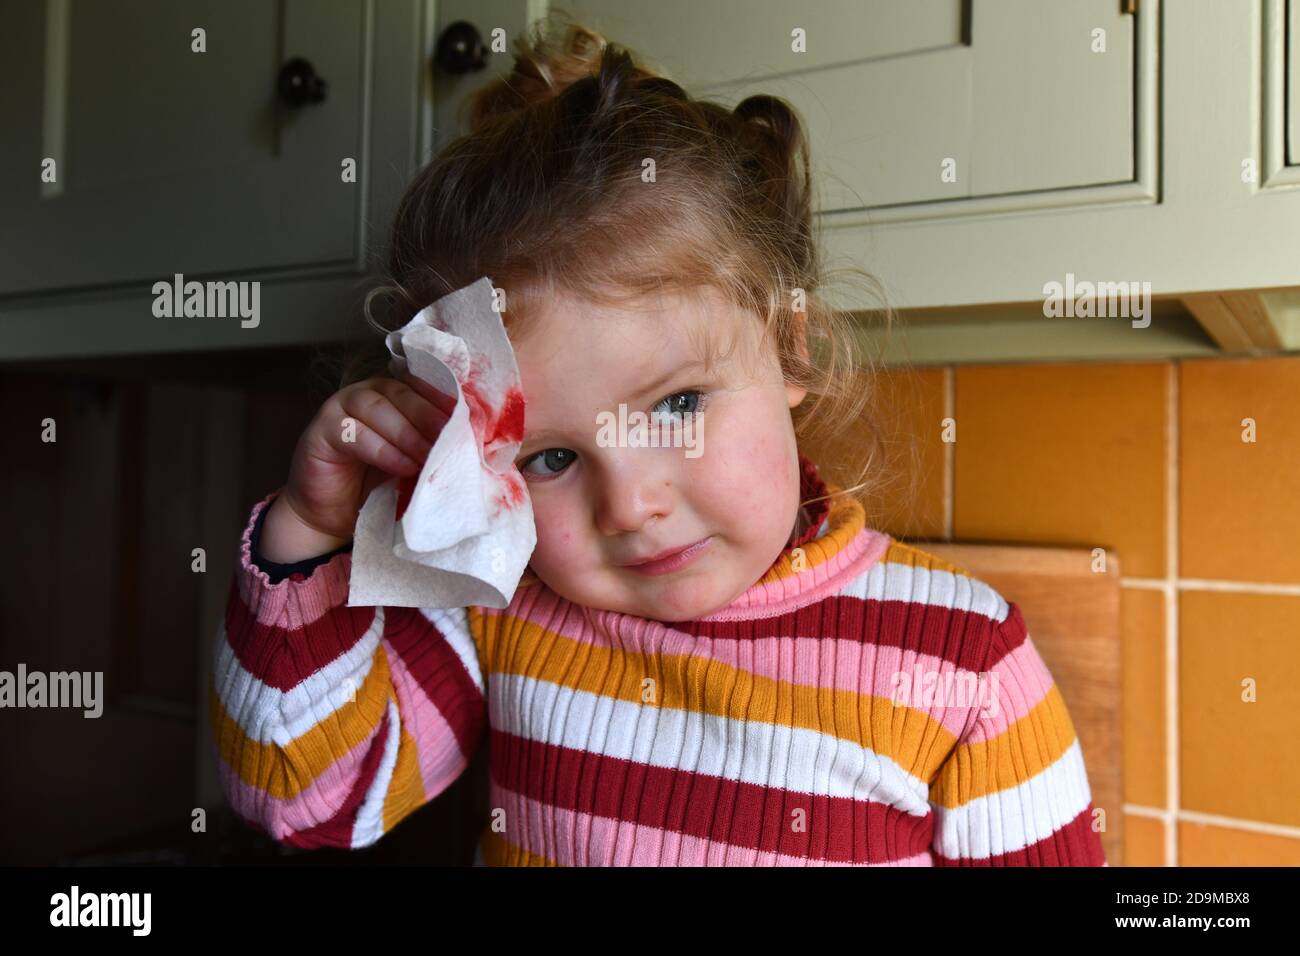 Child young girl nursing an injury after fall at home Stock Photo